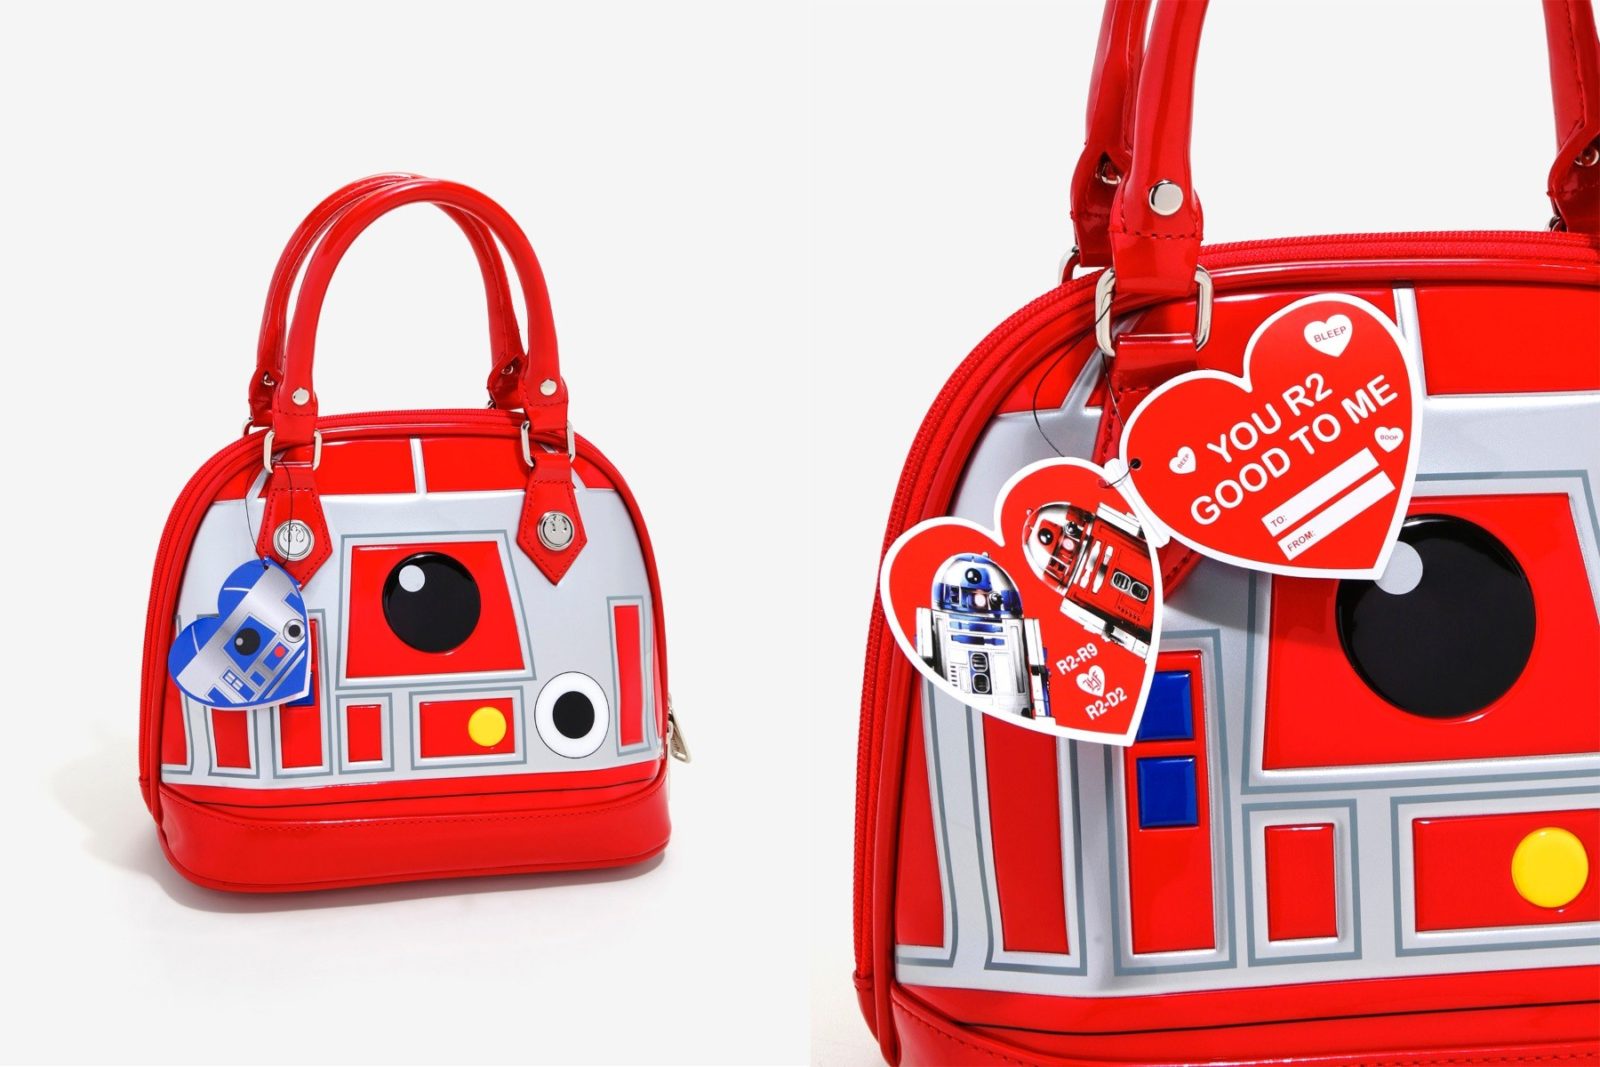 Box Lunch exclusive R2-R9 bag now online